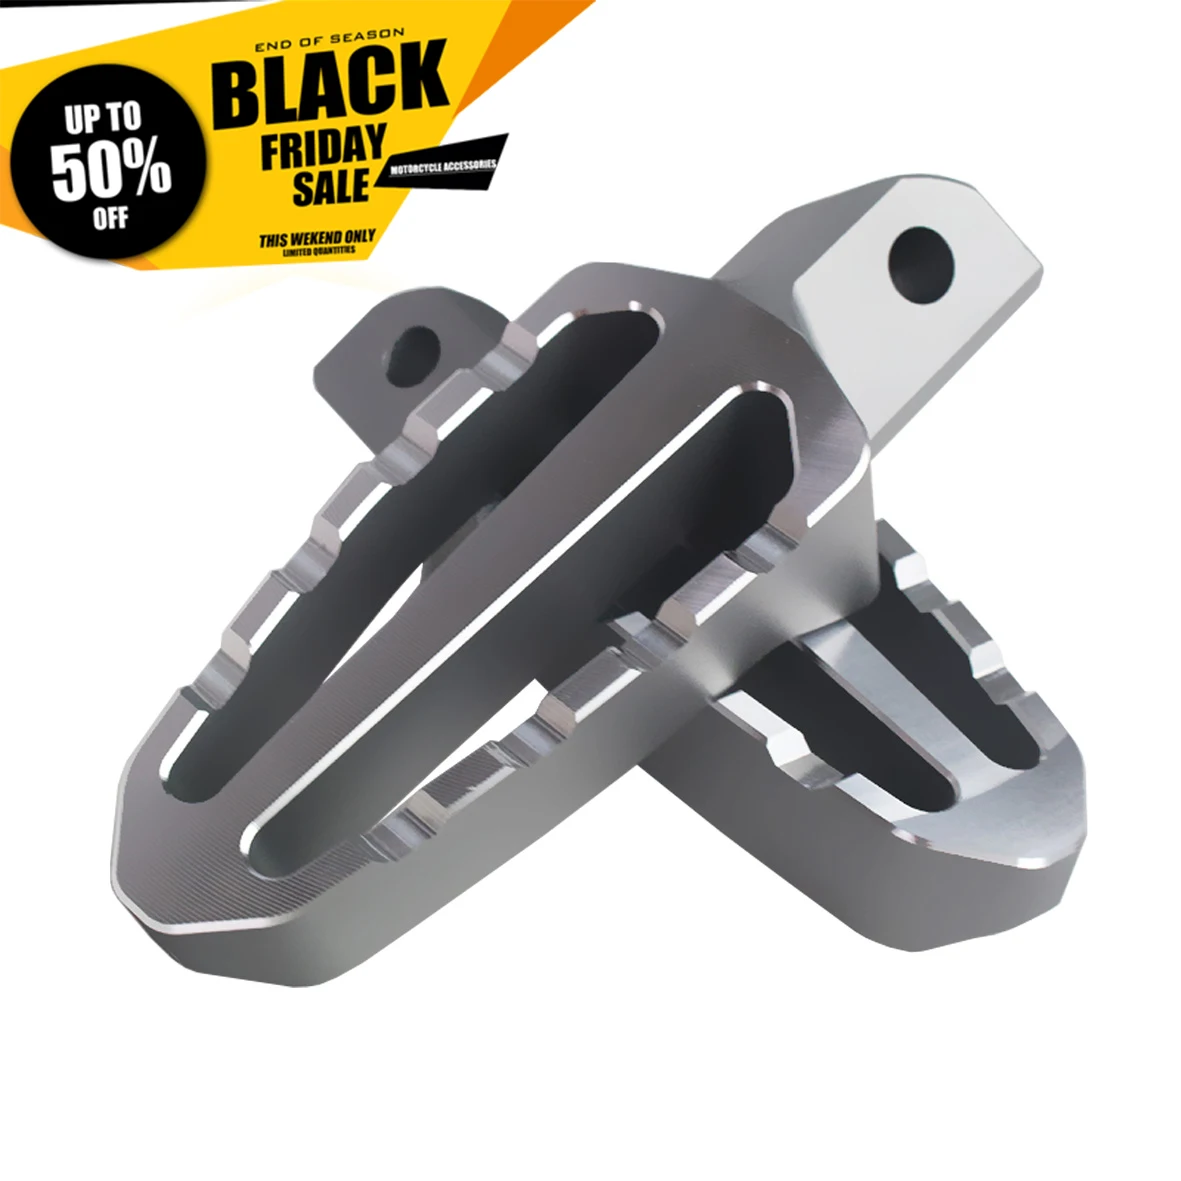 

FOR BENELLI Leoncino 500 leoncino 50 motorcycle accessories front billet foot width pedal pedal front rest pedal